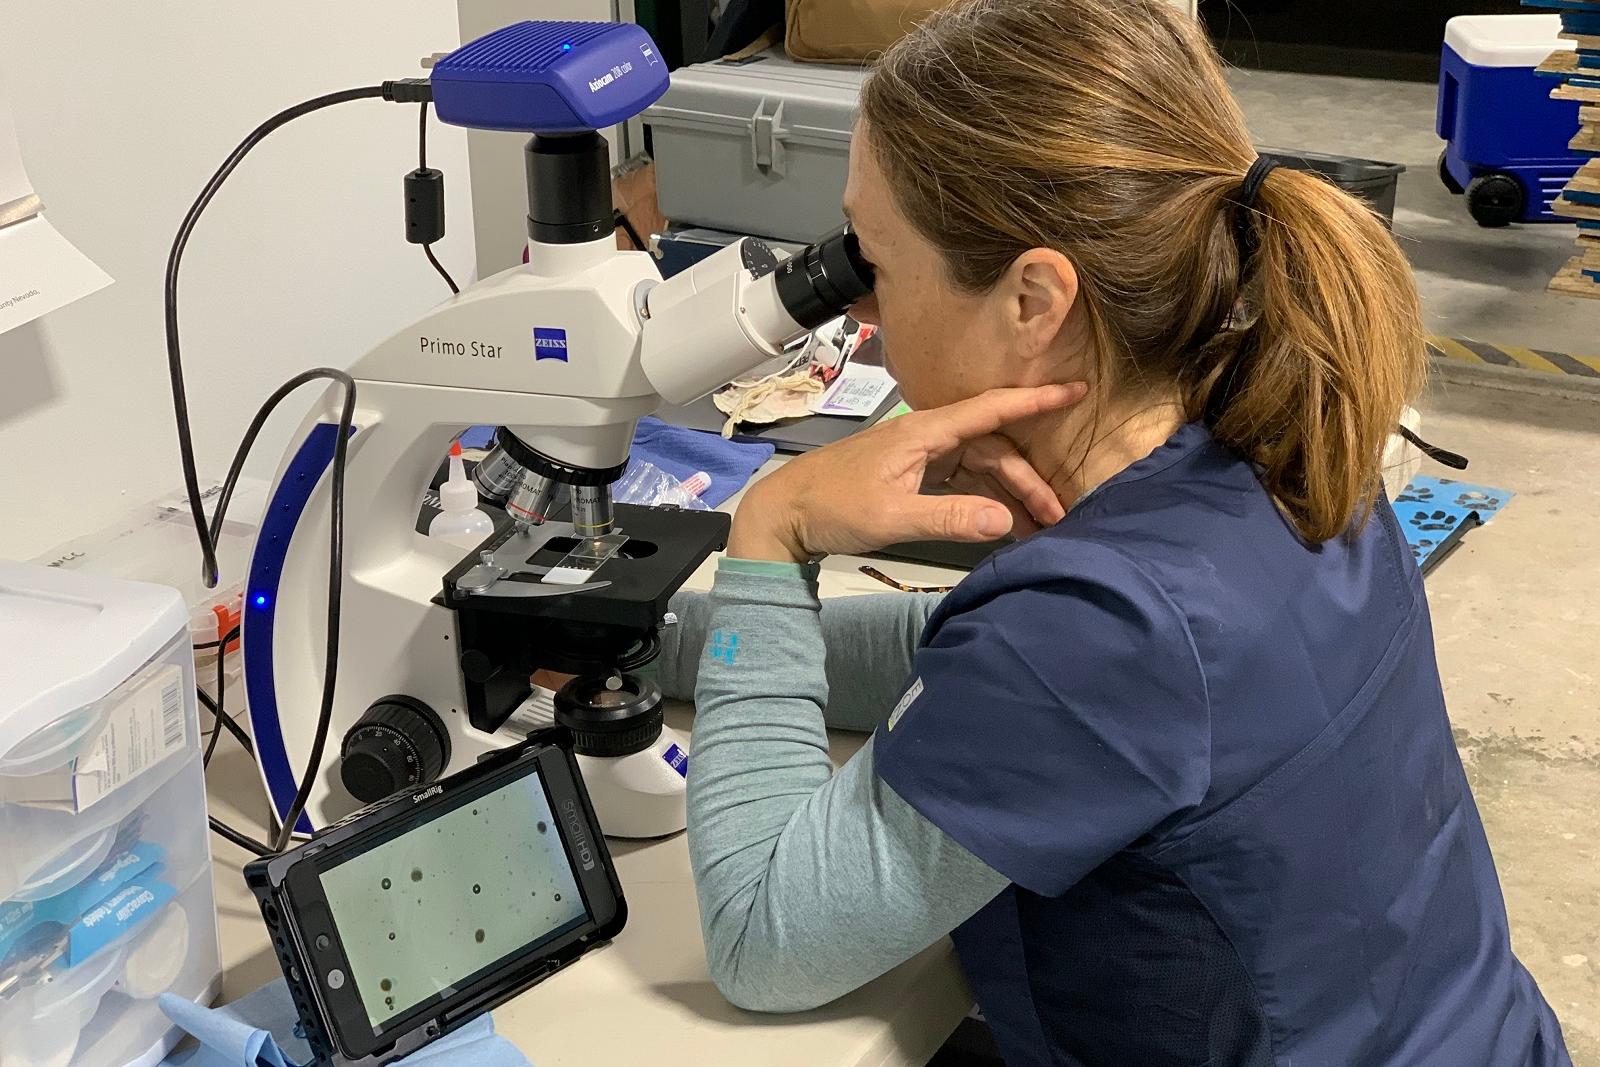 Veterinarian Dr. Michelle Oakley working with her ZEISS Primostar clinical microscope